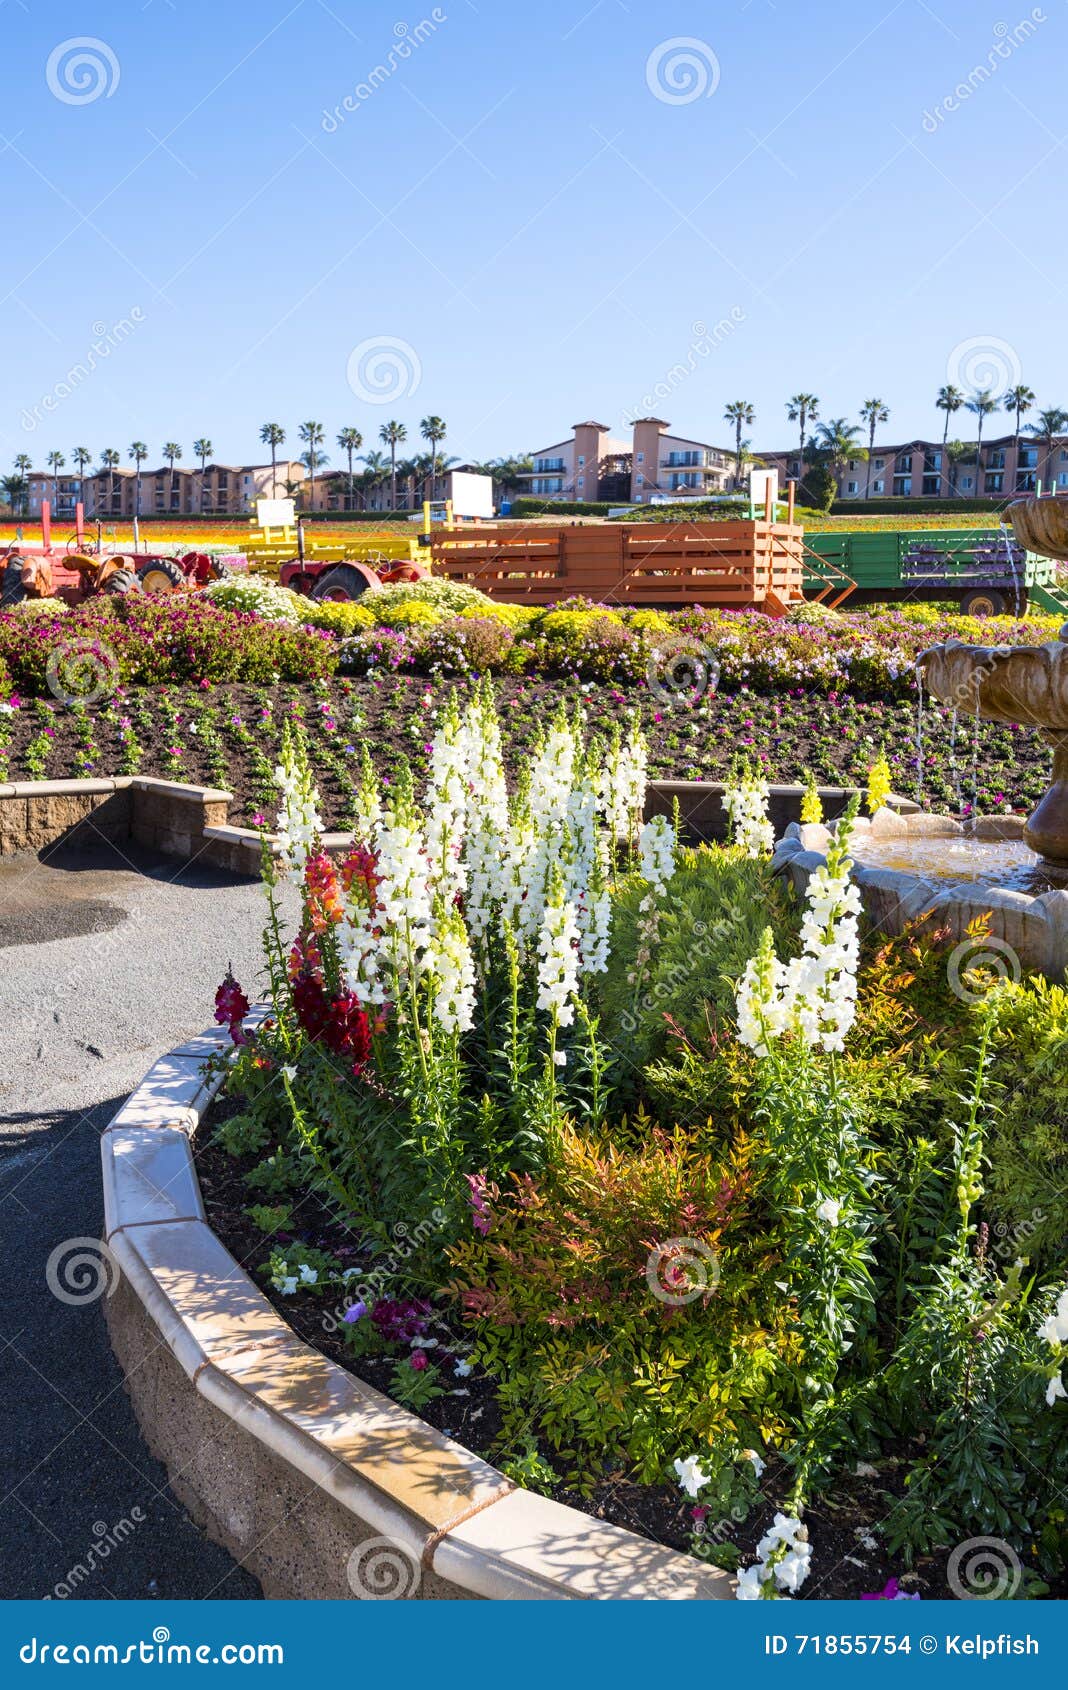 blooming flower garden at flower fields stock photo - image of diego